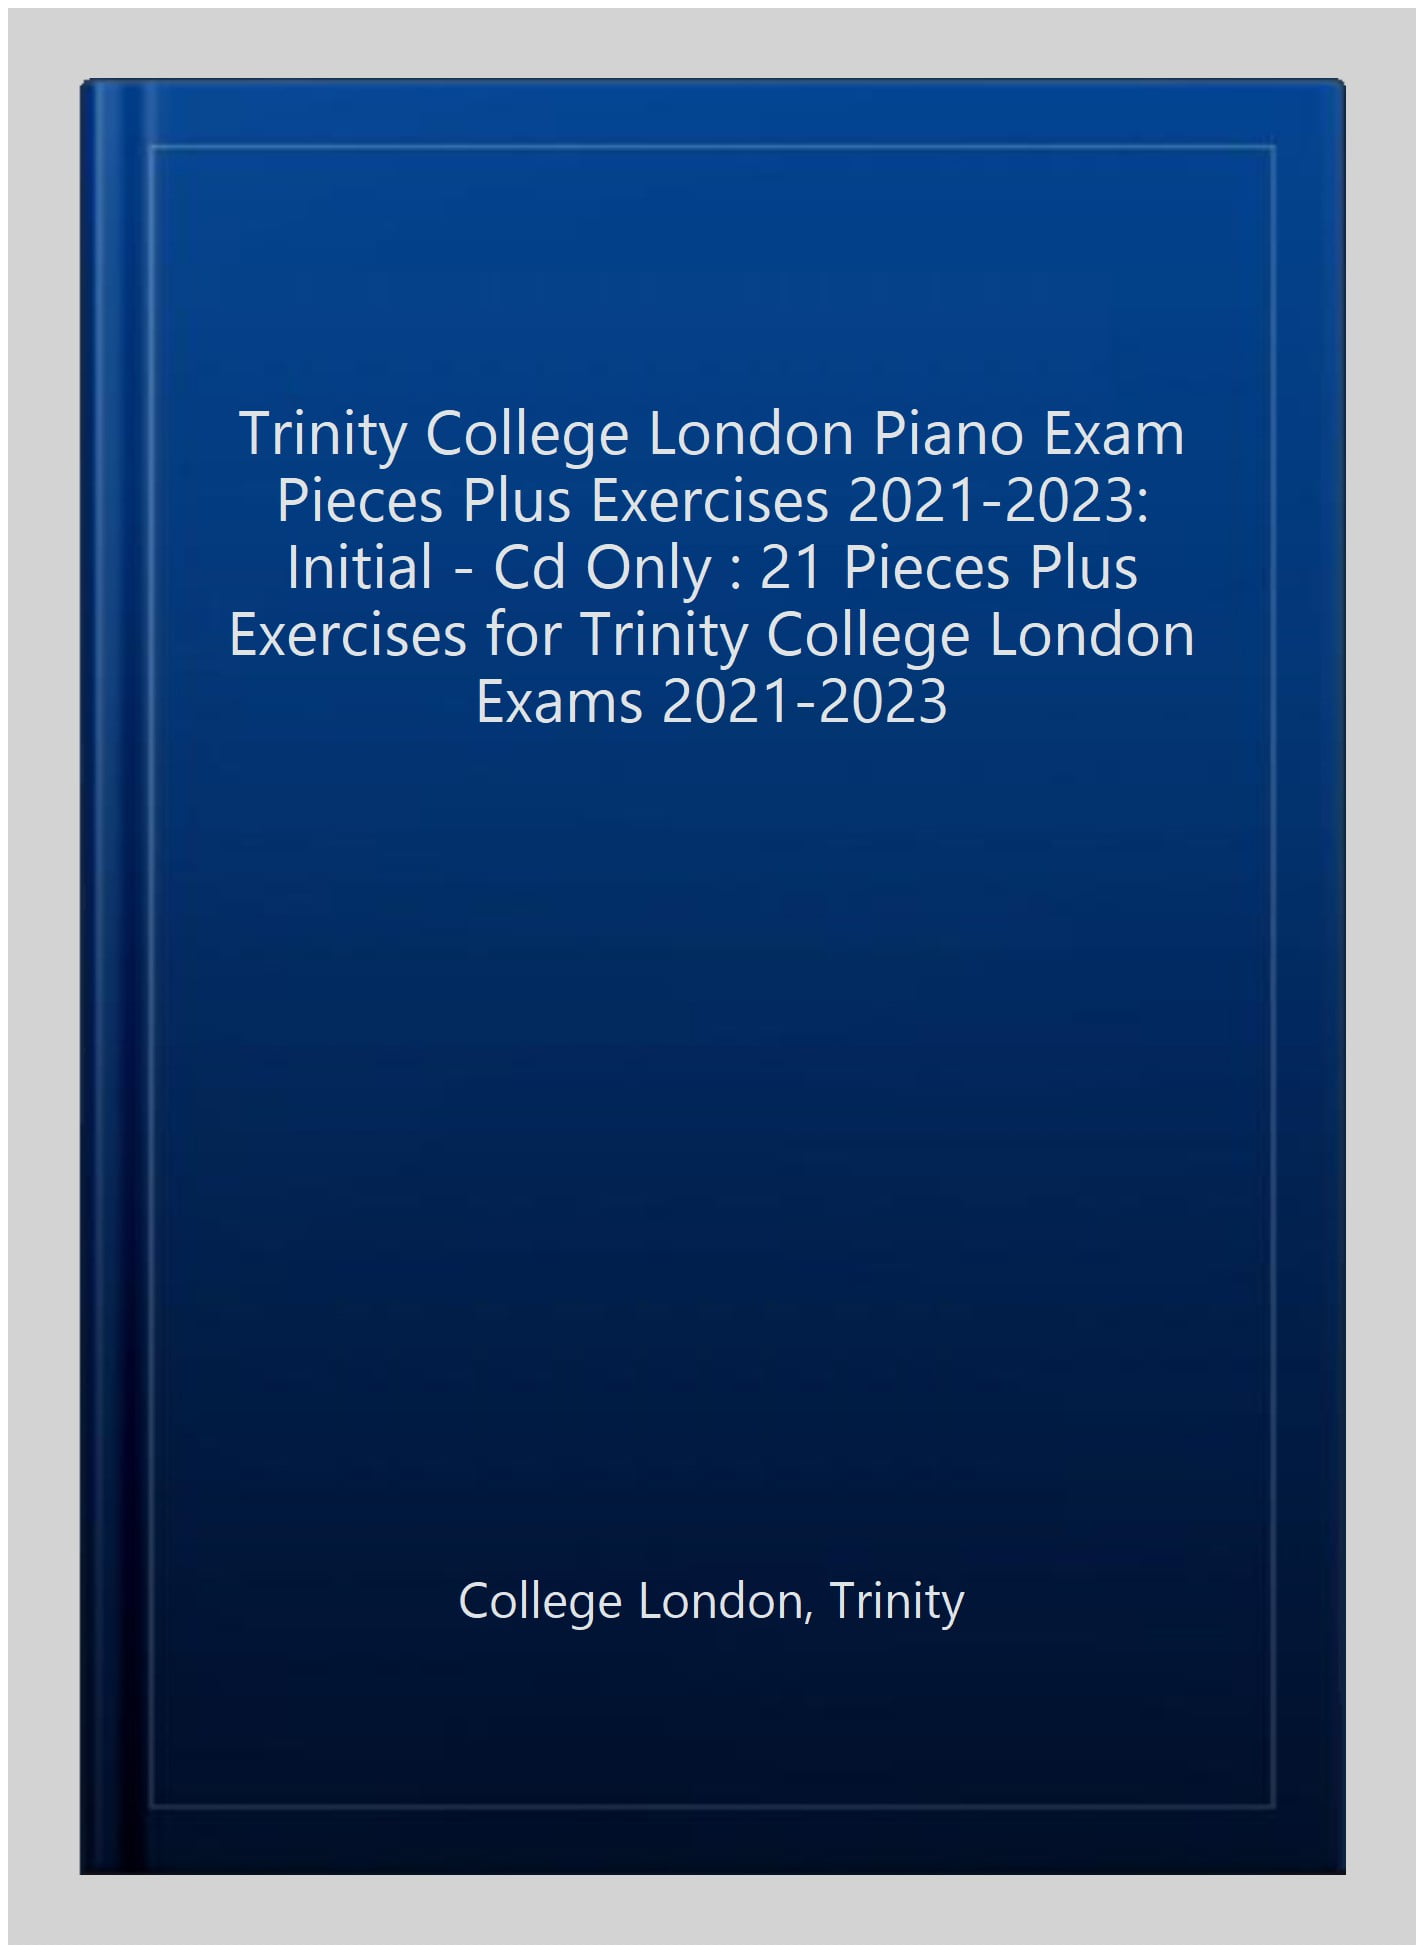 Extended Edition 21 pieces plus exercises for Trinity College London exams 2021-2023 Trinity College London Piano Exam Pieces Plus Exercises 2021-2023 Initial 